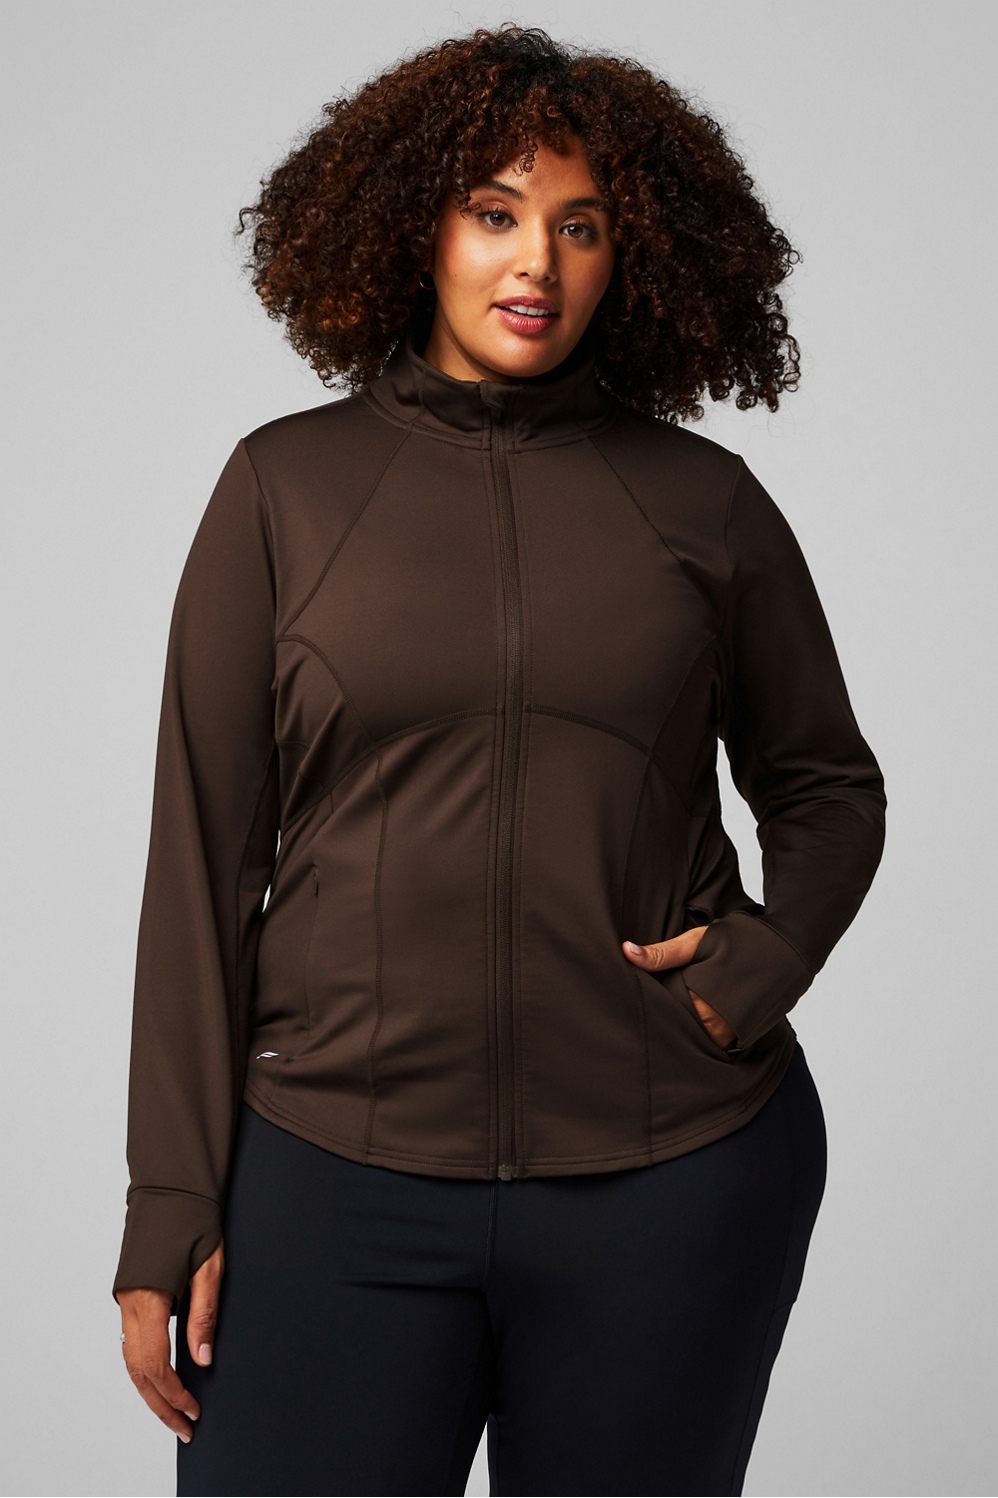 Just My Size Women's Plus Cold Weather Clothing & Accessories in Cold  Weather Clothing Shop 